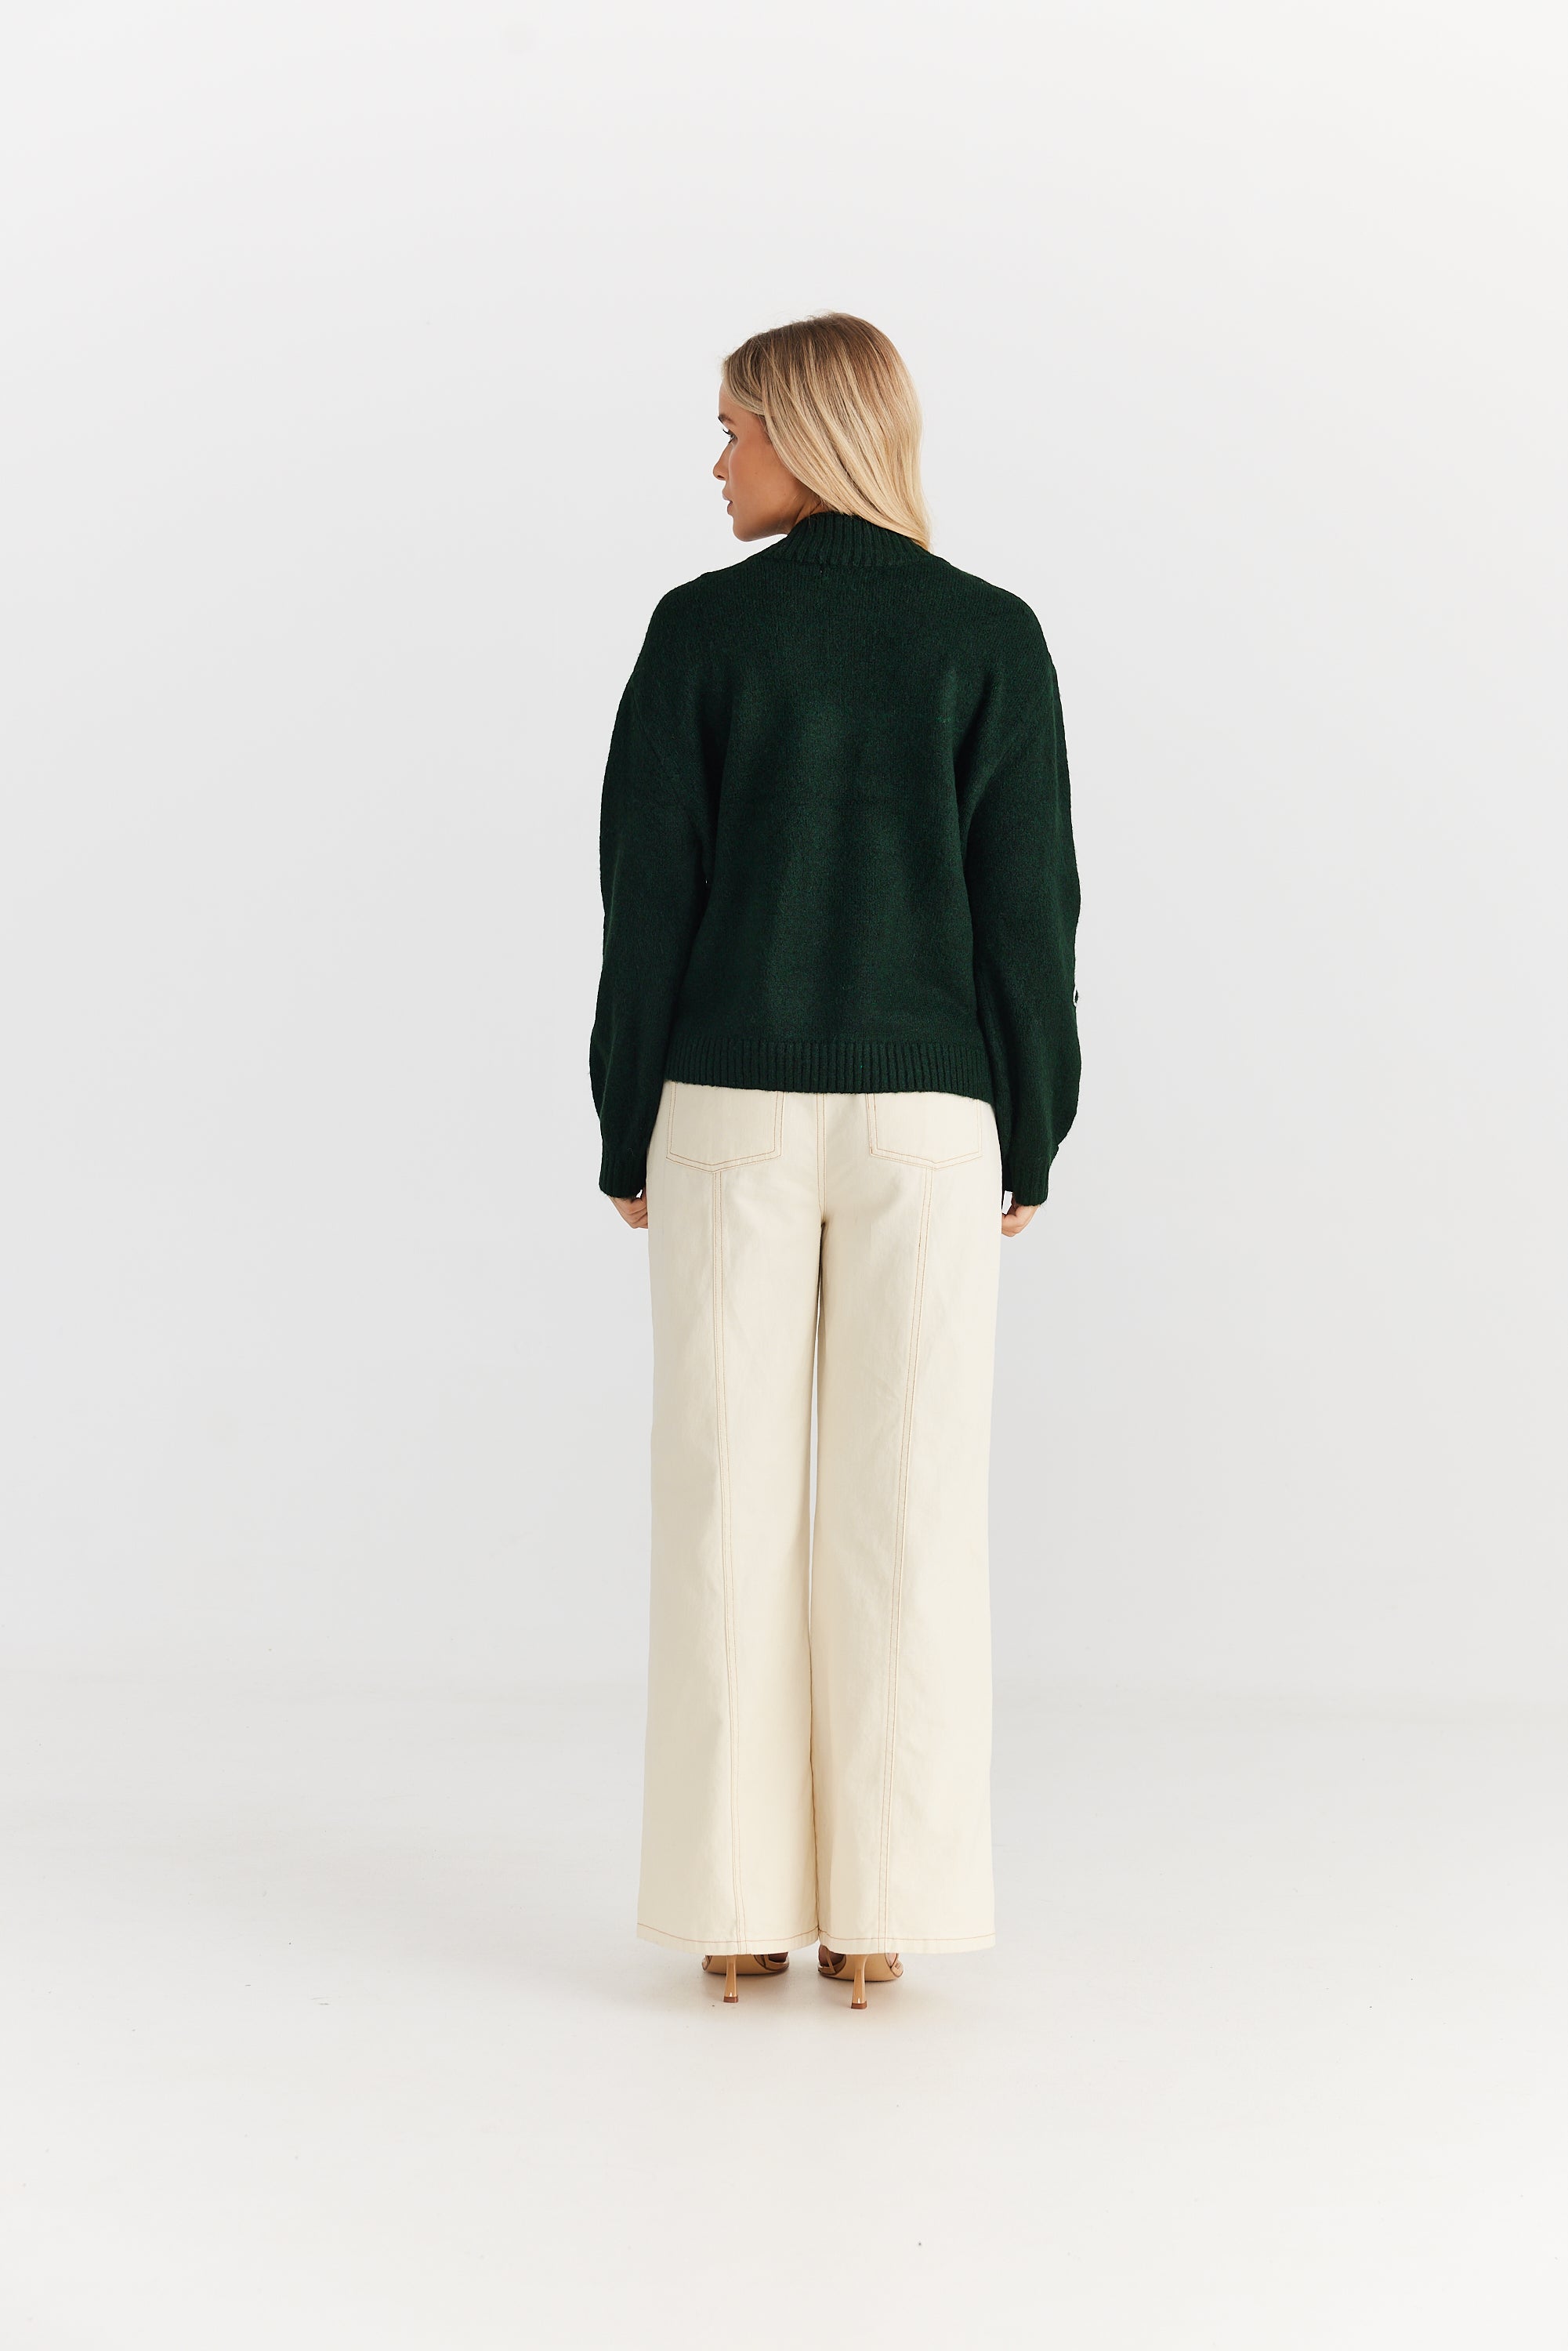 Bloom Knit - Forest-Knitwear & Jumpers-Daisy Says-The Bay Room